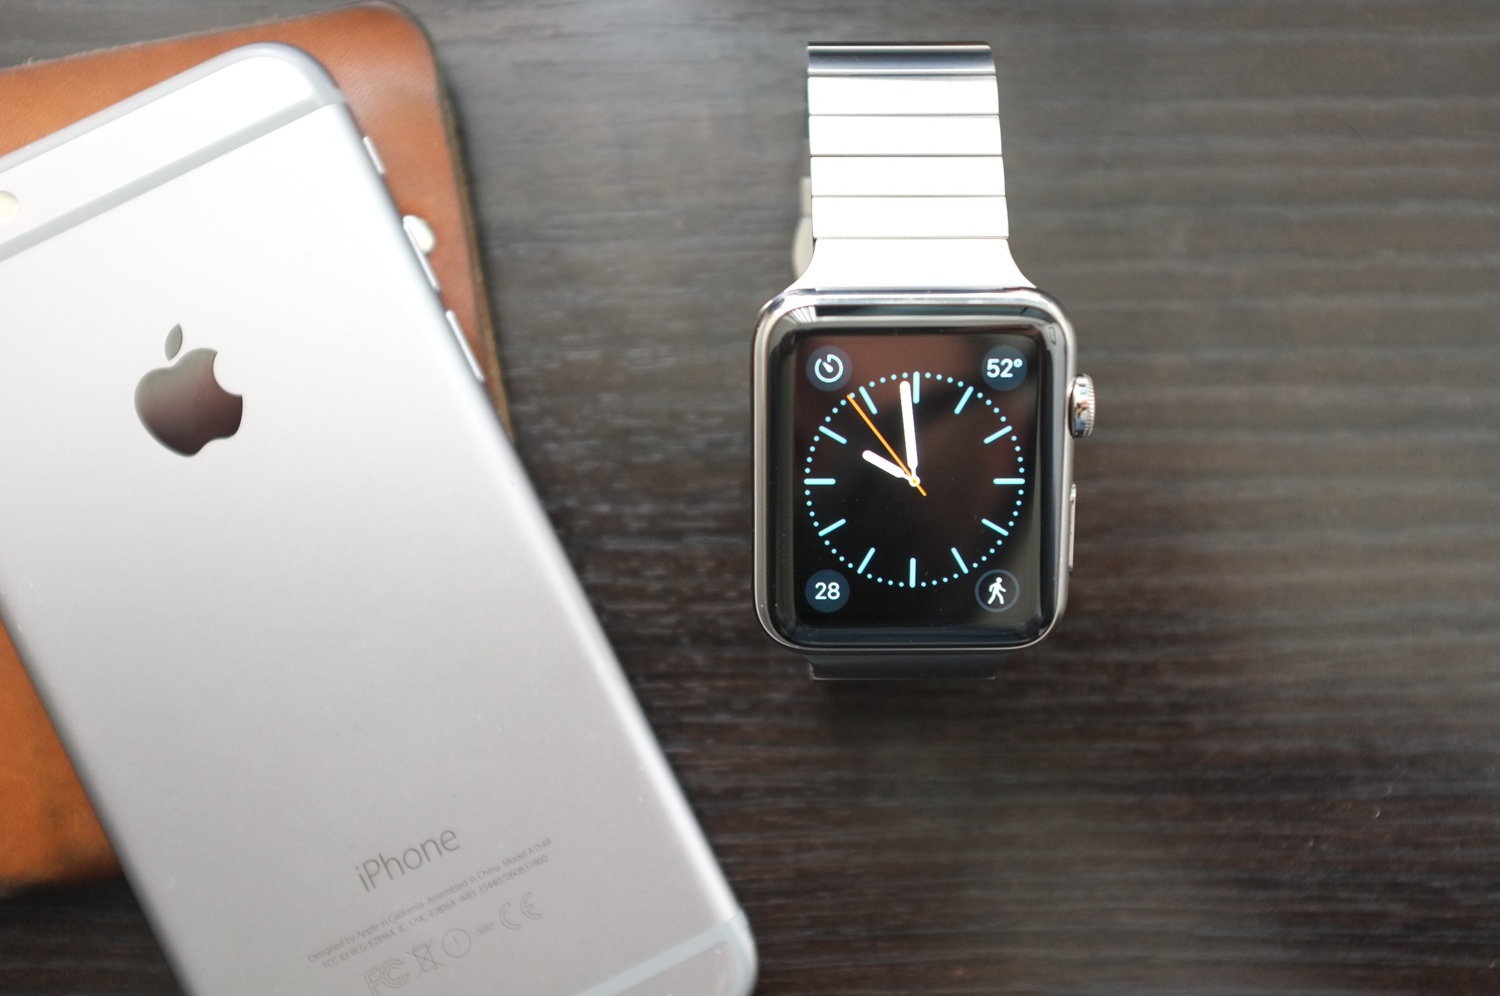 Quanta Rumored To Start Trial Production of Apple Watch 2 This Month